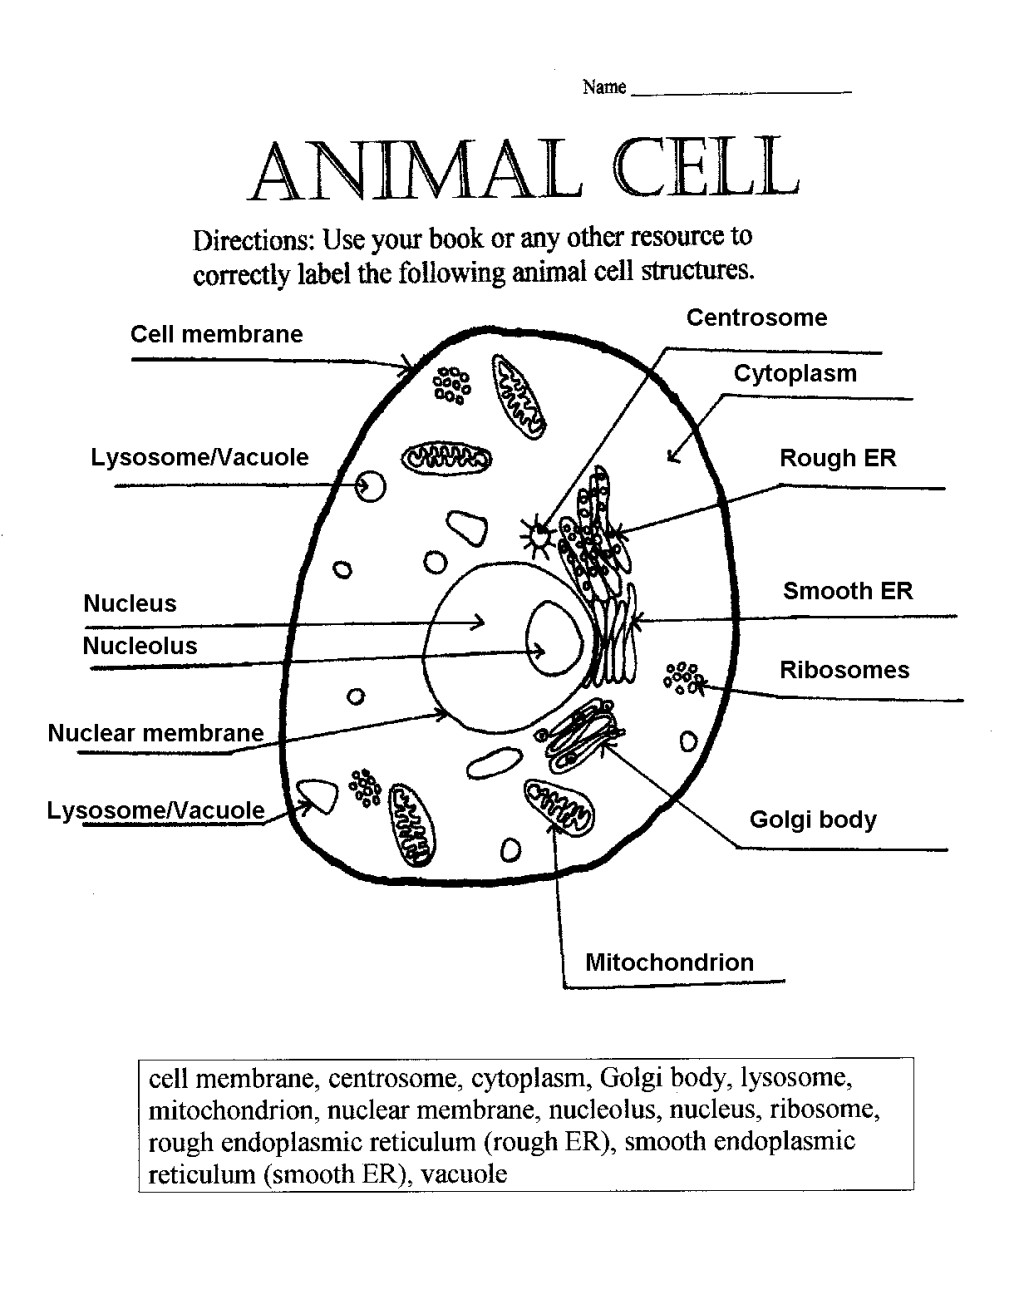 Animal Cell Labeling Worksheet Answers